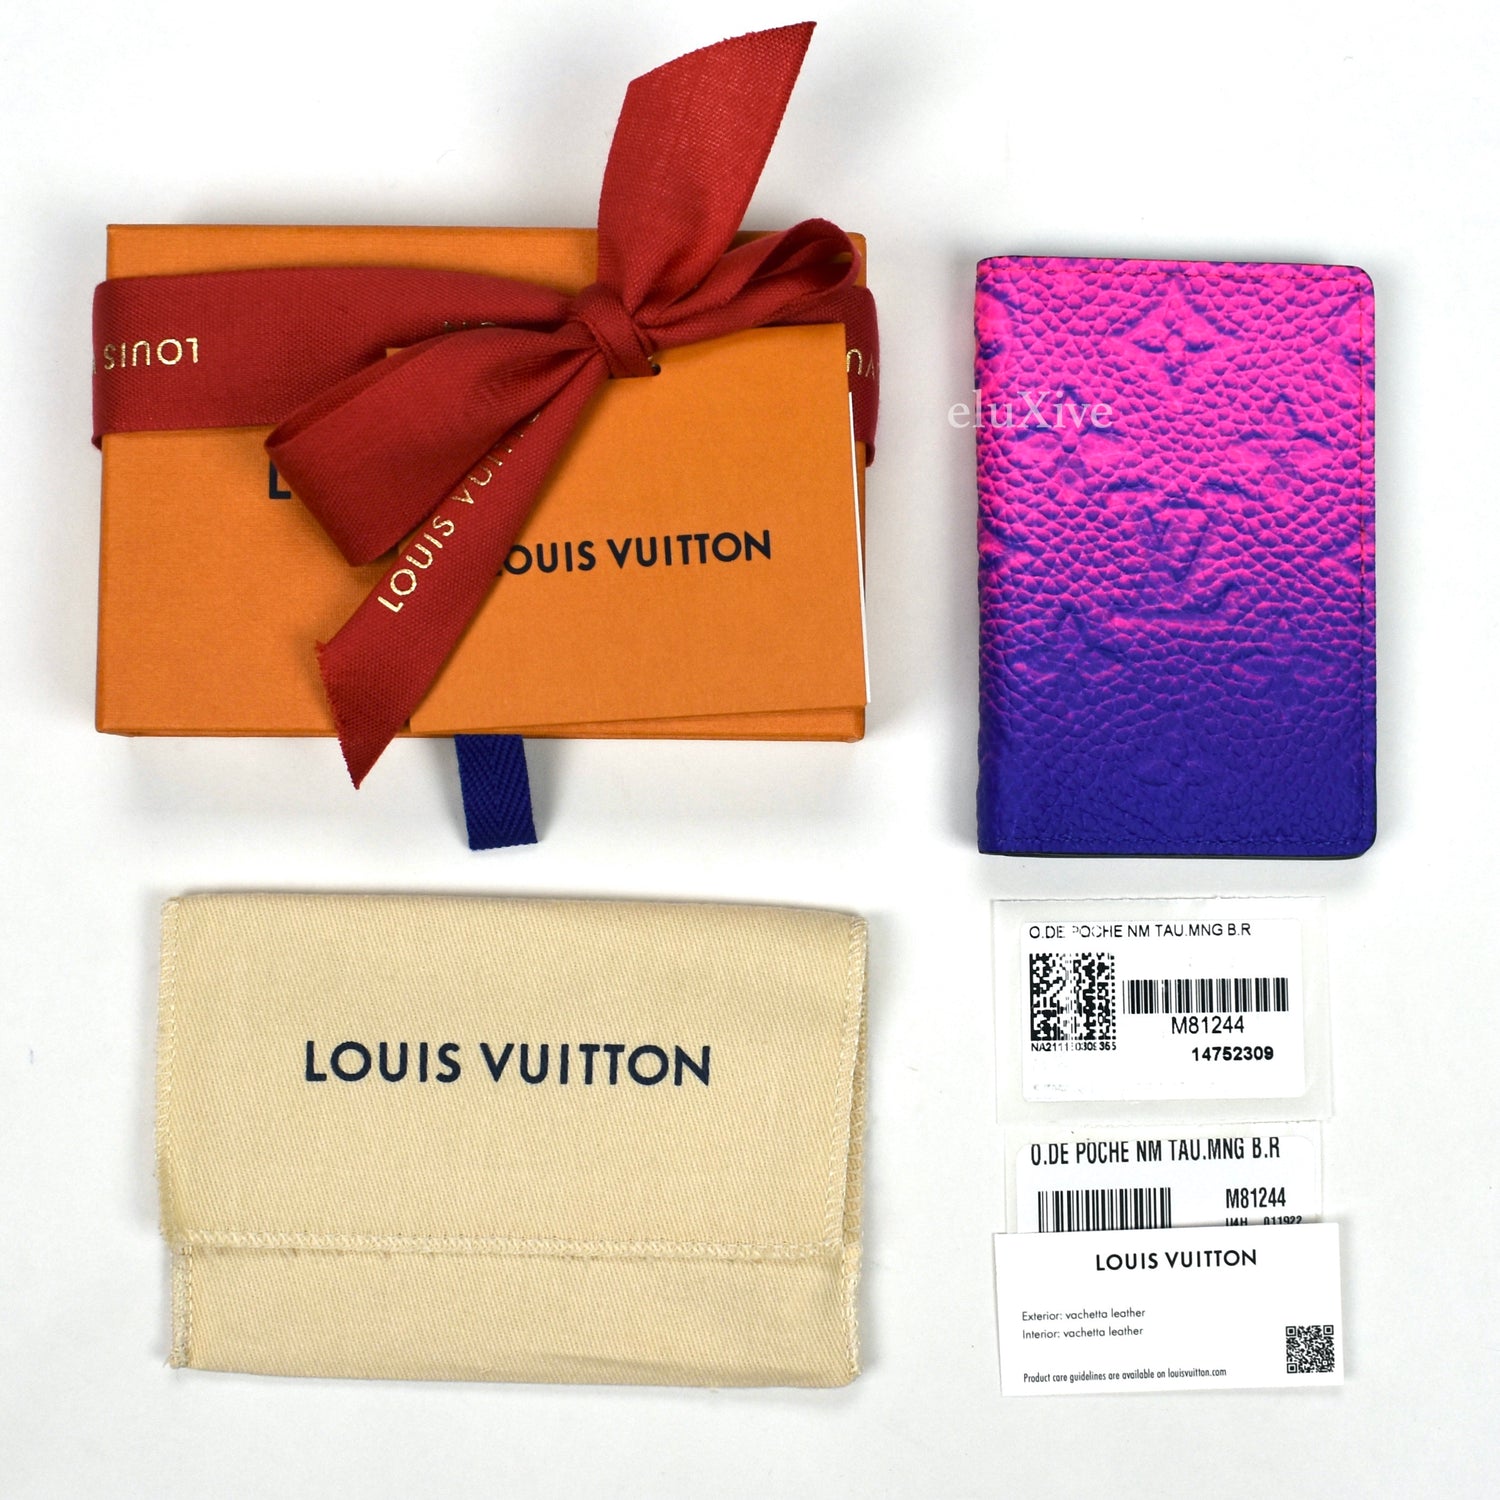 Louis Vuitton Virgil Abloh Blue And Pink Monogram Illusion Leather Pocket  Organizer, 2022 Available For Immediate Sale At Sotheby's